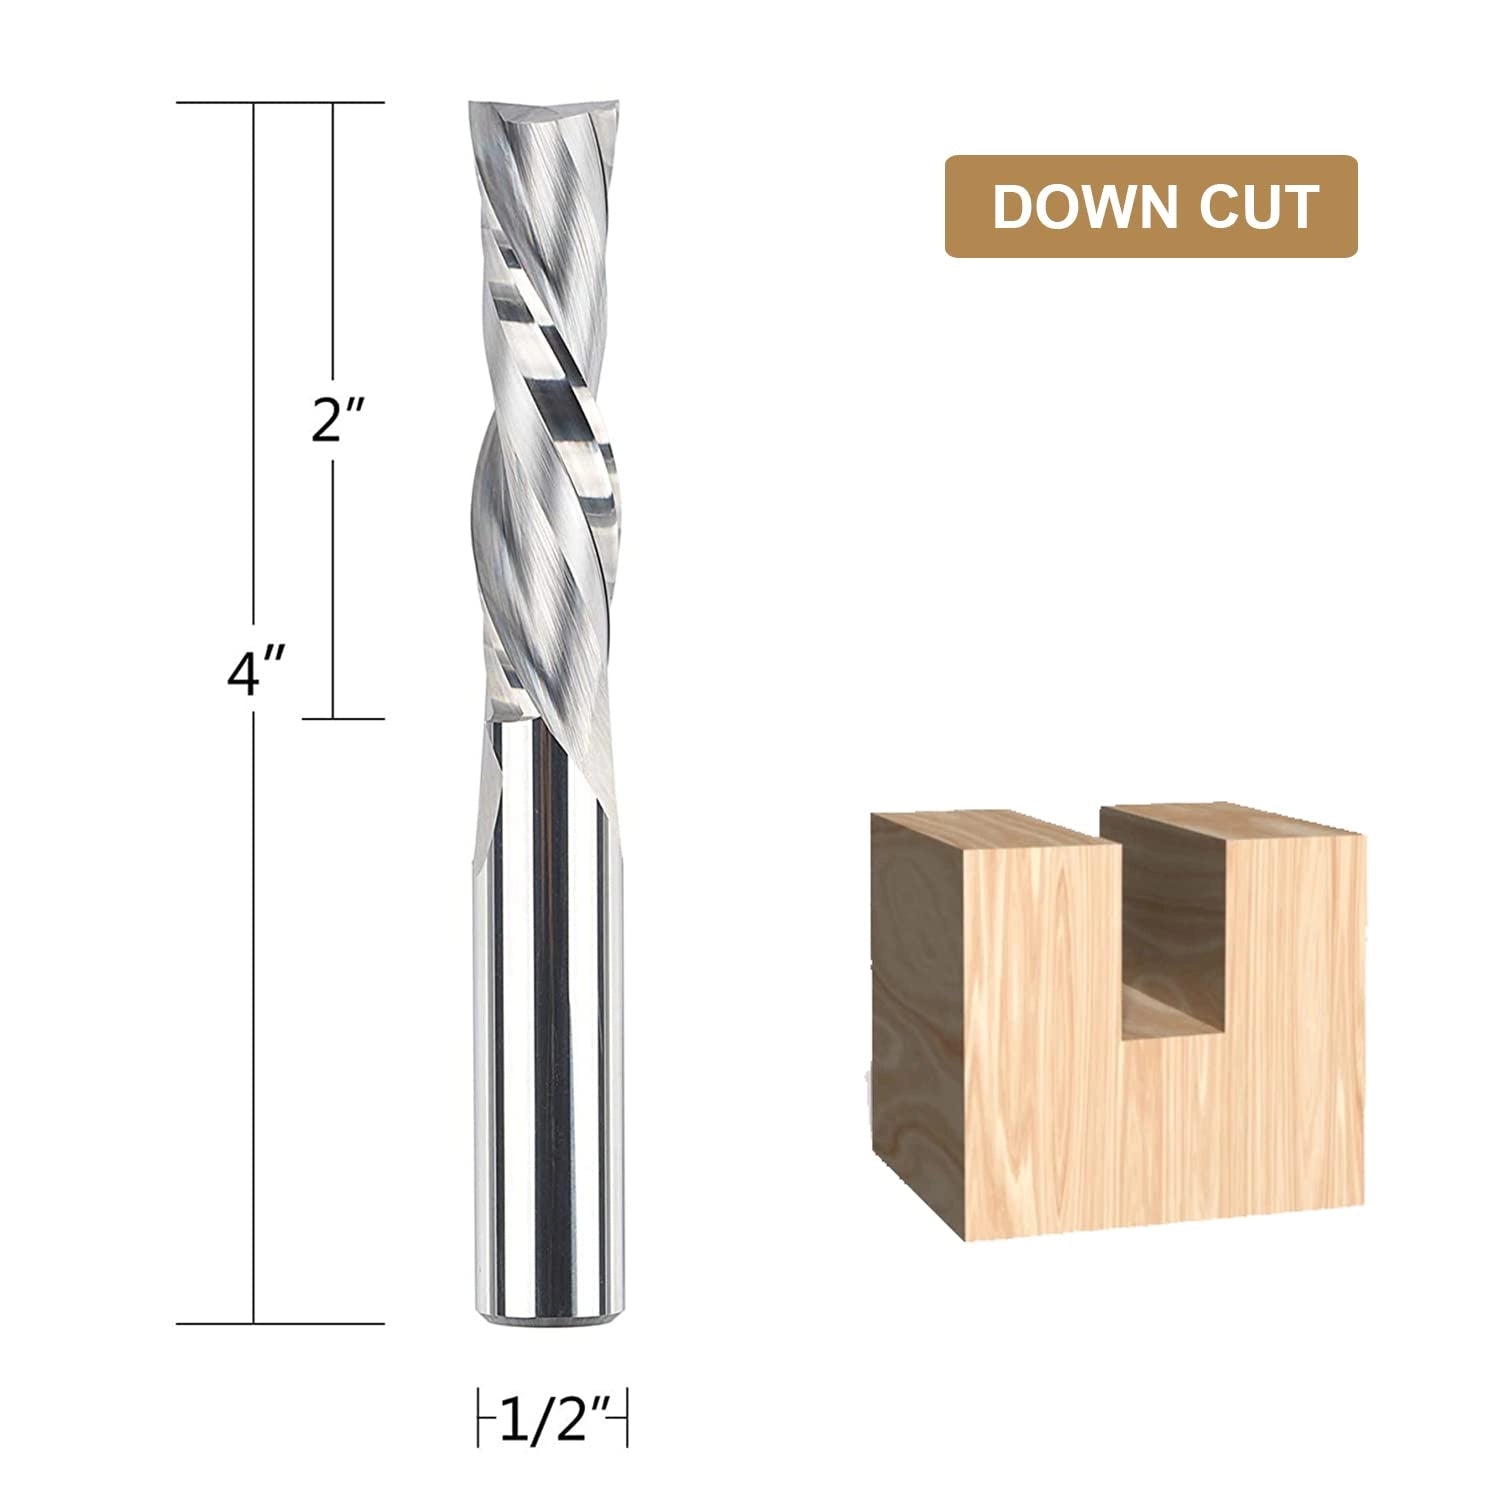 SpeTool Downcut 1/2" Diam 4" Extra Long Router Bit For Wood Carving Plunge Cut